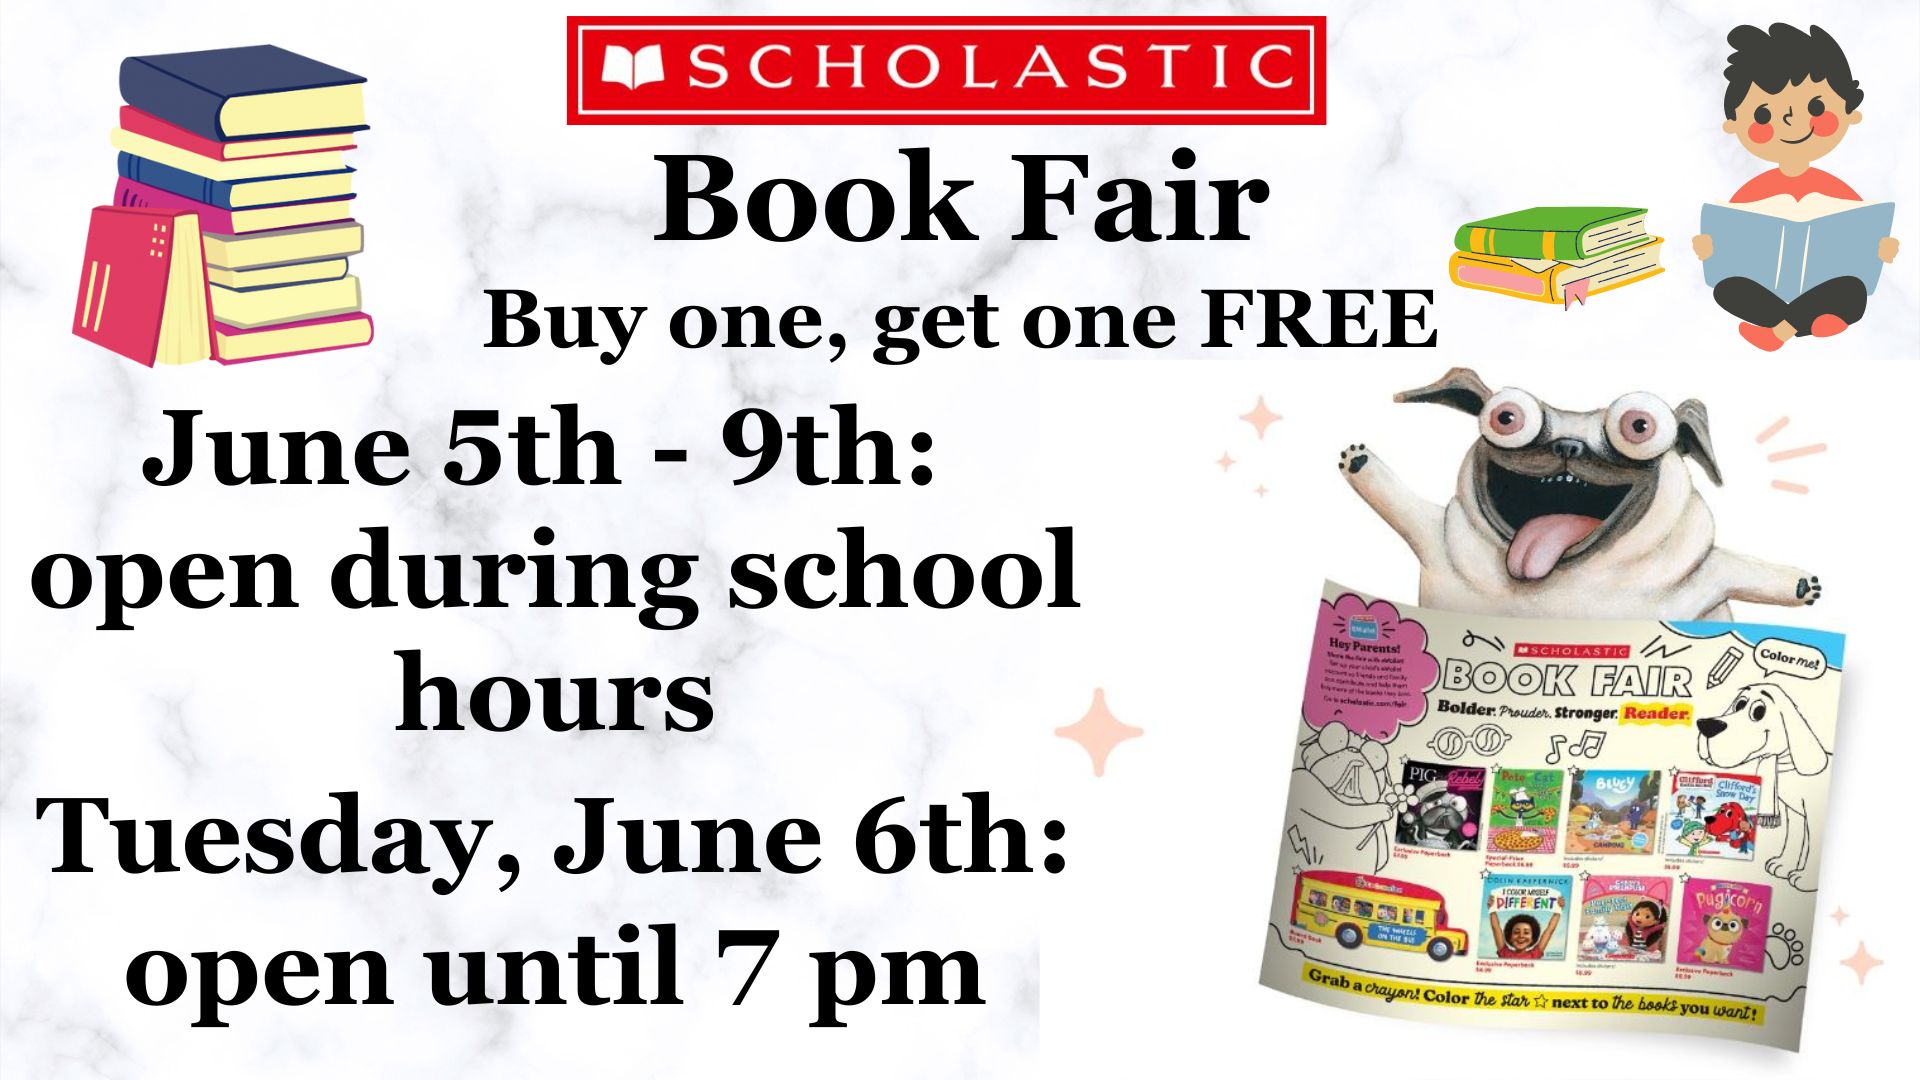 Scholastic Book Fair June 5th - 9th open during school hours. June 6th open until 7 pm. Buy one, get one Free!